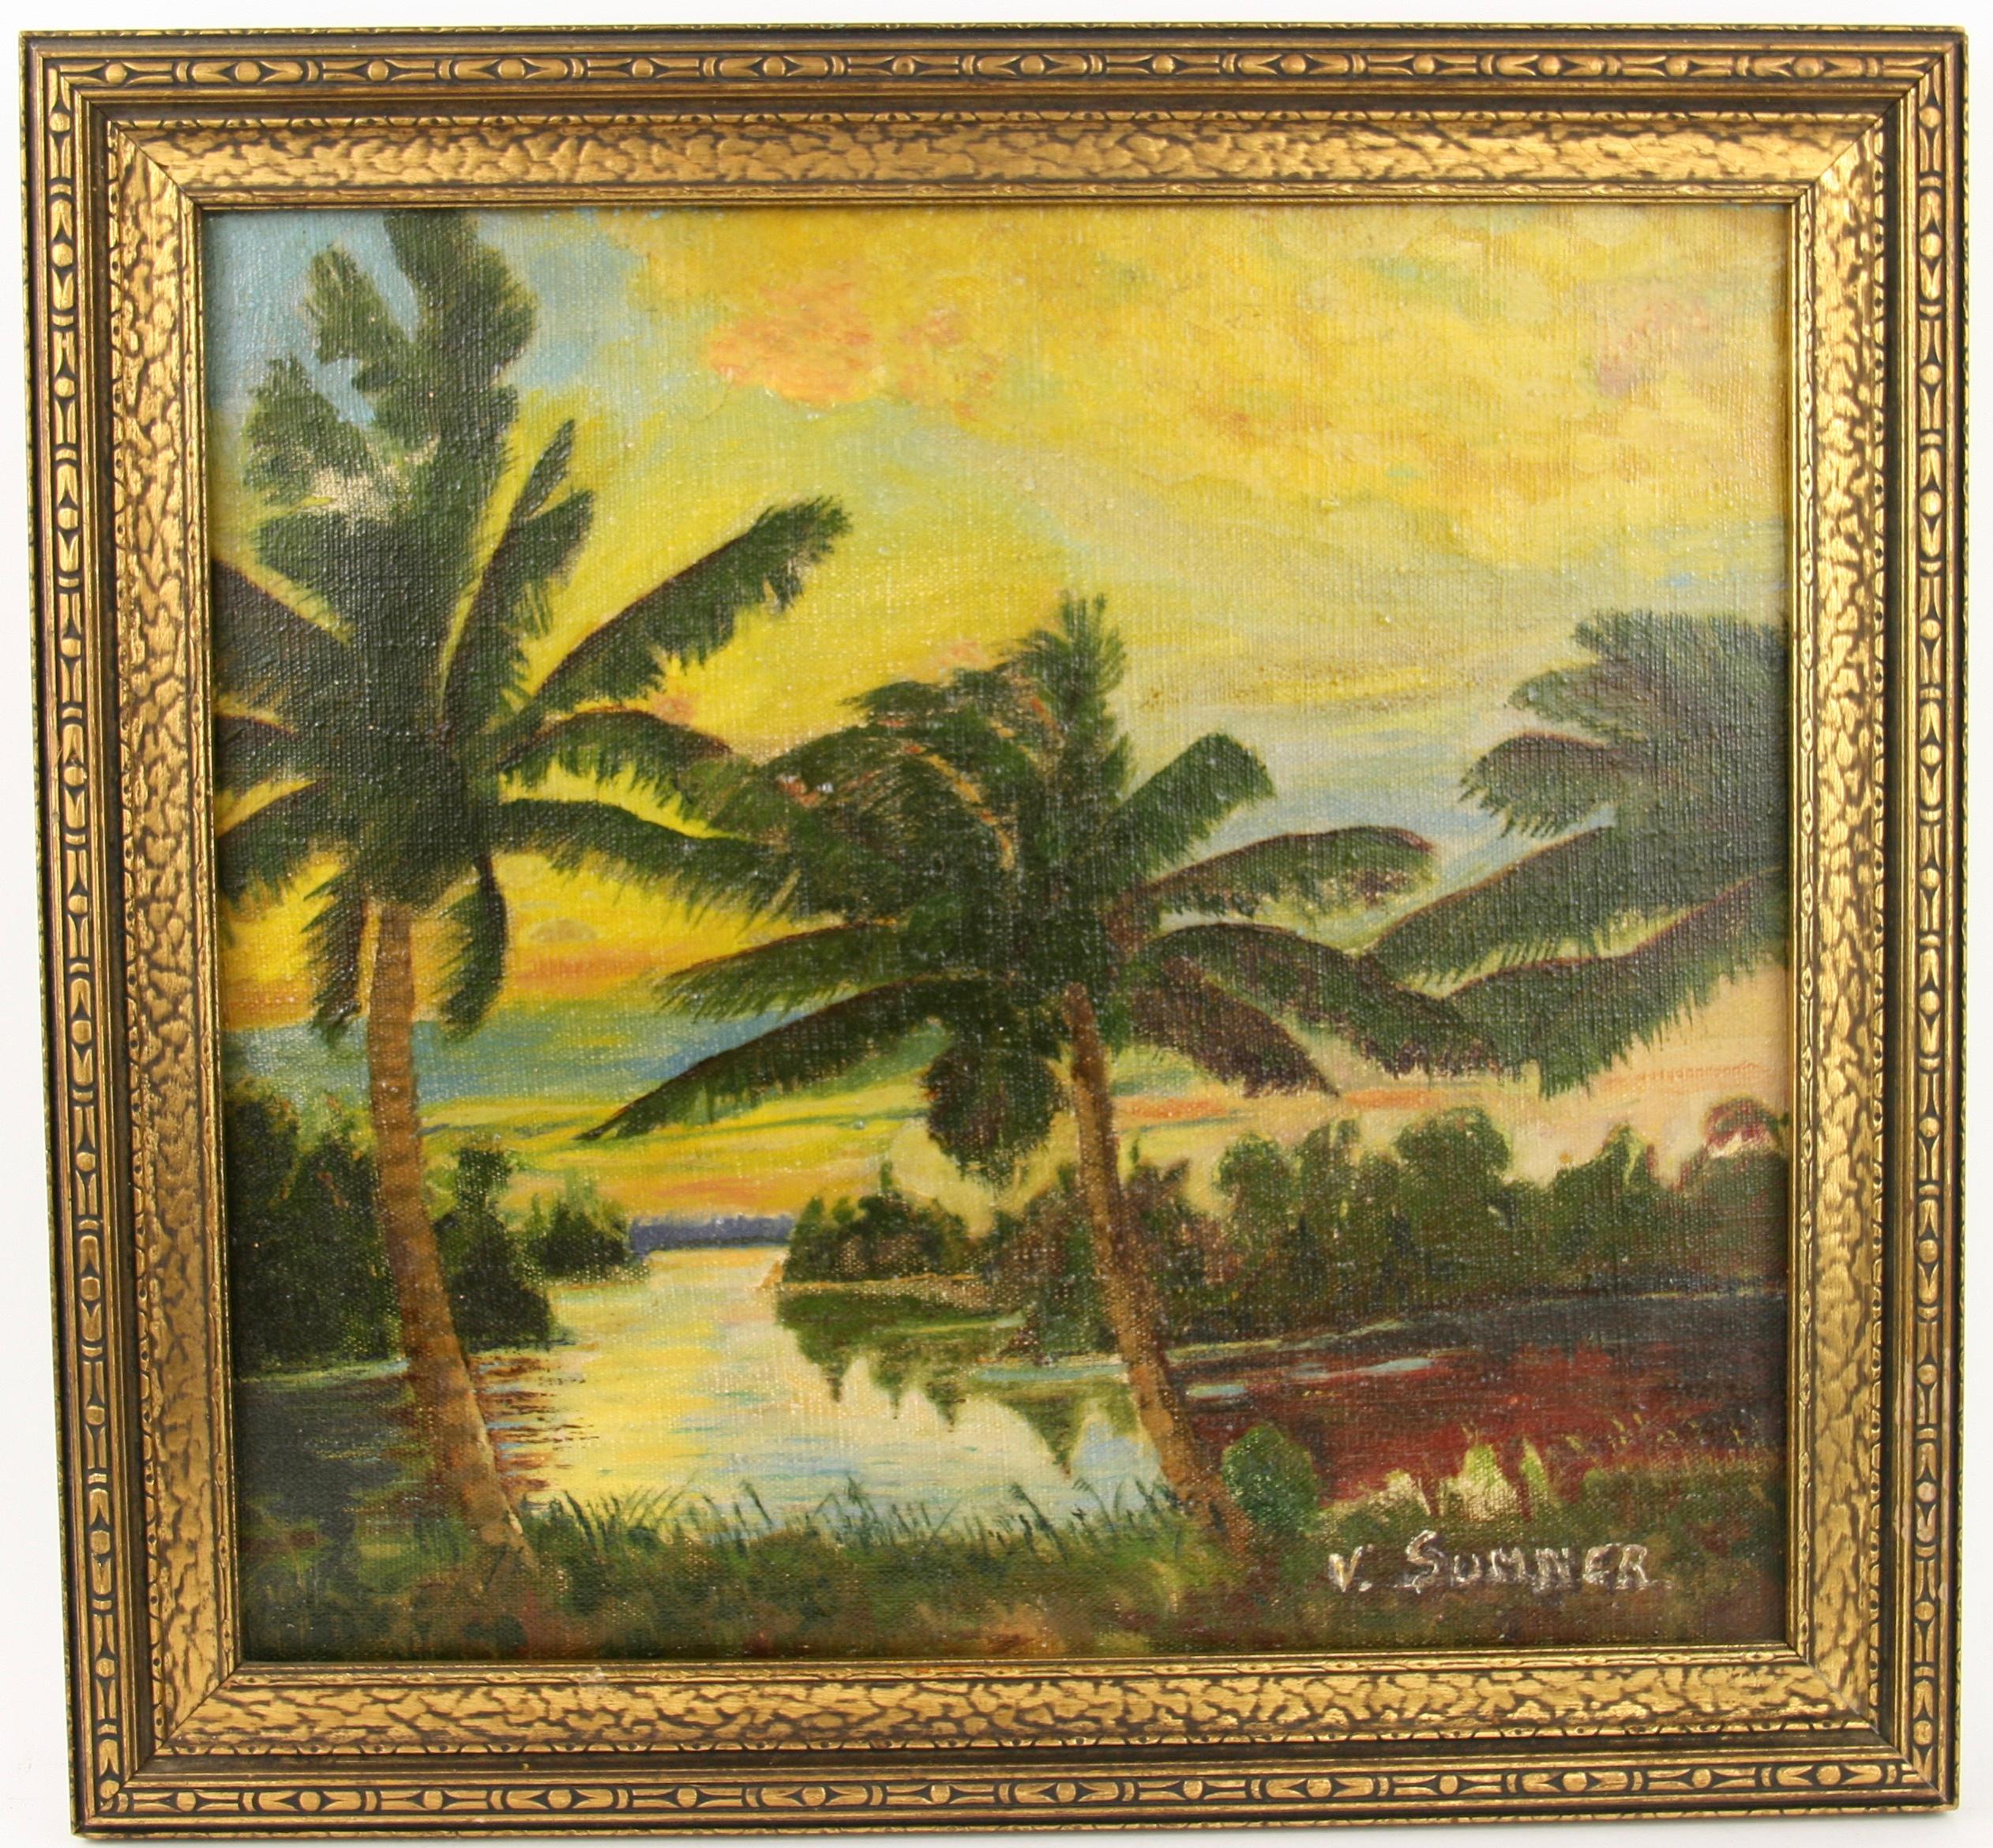 5-3096 Oil on canvas of a tropical sunset
Set in a vintage gilt wood frame